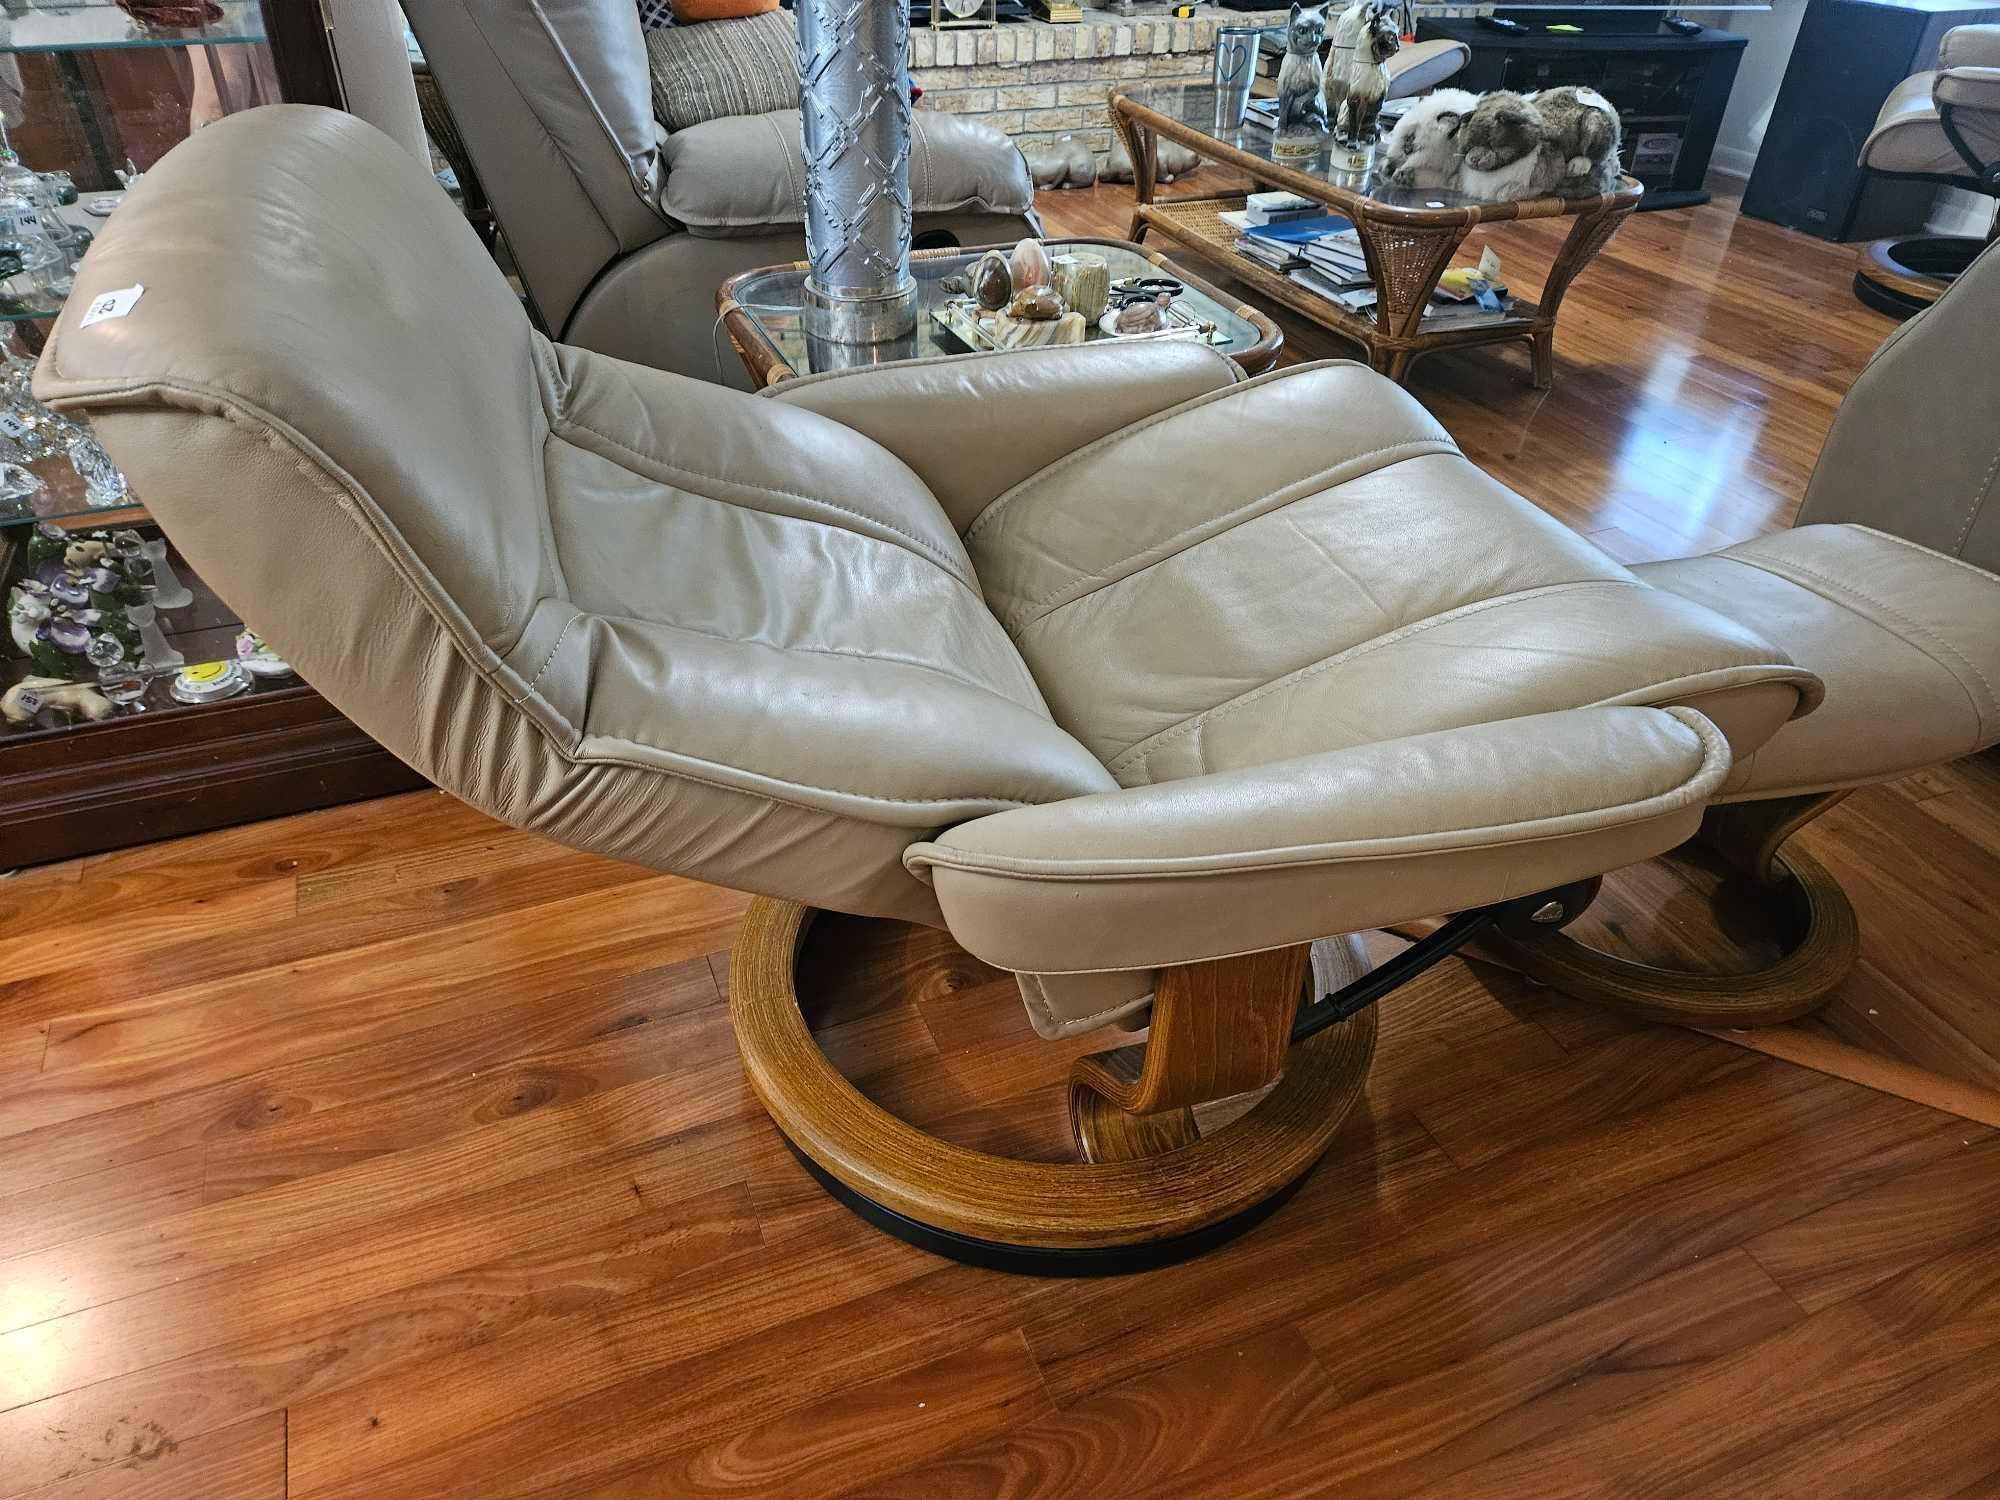 STRESSLESS Brand Leather swivel, RECLINER CHAIR WITH OTTOMAN